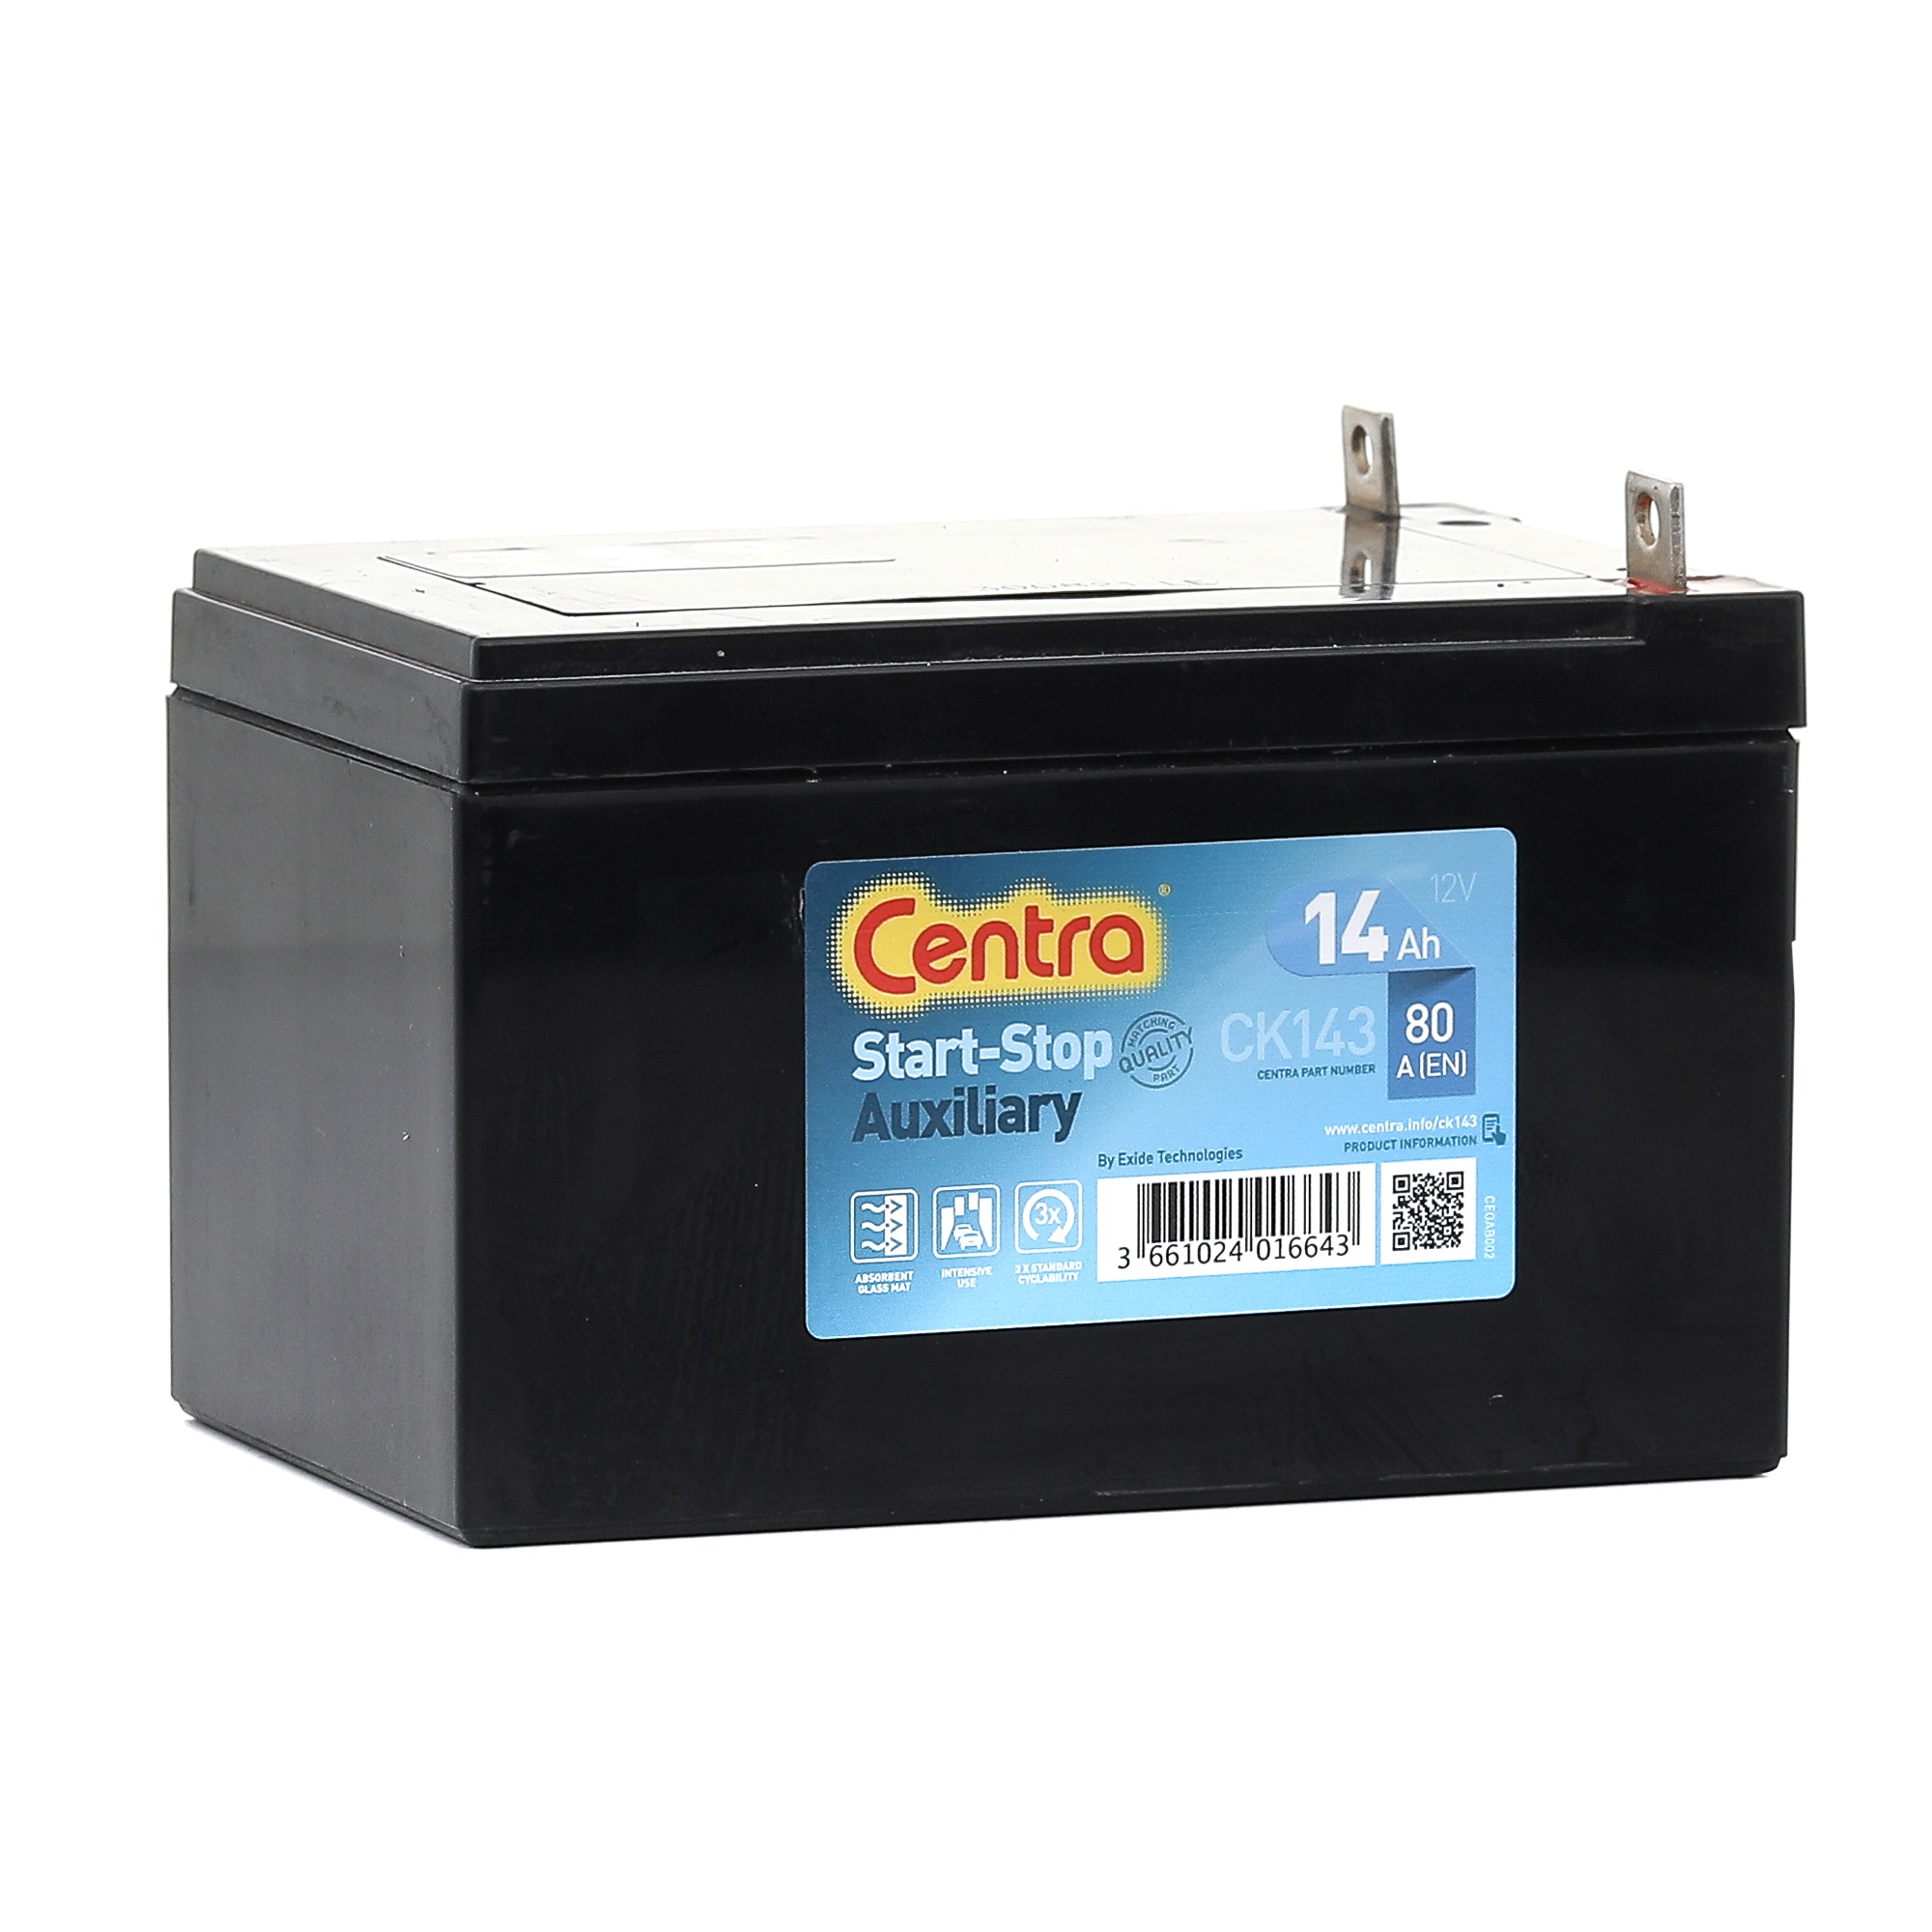 Centra Start-Stop Auxiliary CK143 (14 A/h) 80A L+